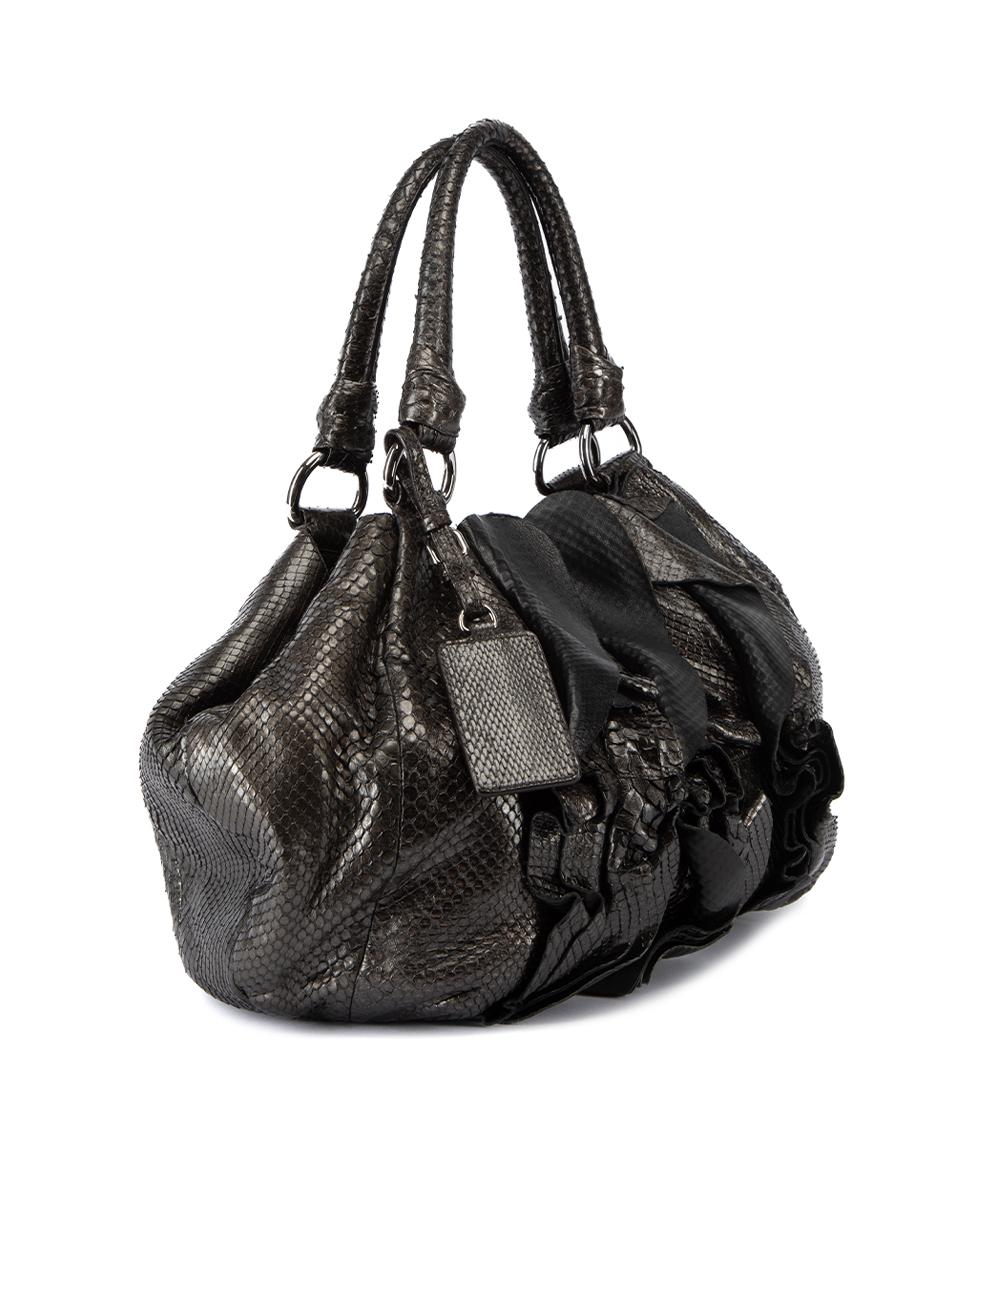 CONDITION is Very good. Minimal wear to bag is evident. Minimal wear to snakeskin leather exterior and bag interior on this used Prada designer resale item. 



Details


Metallic grey

Snakeskin leather

Medium hobo bag

Layered ruffles